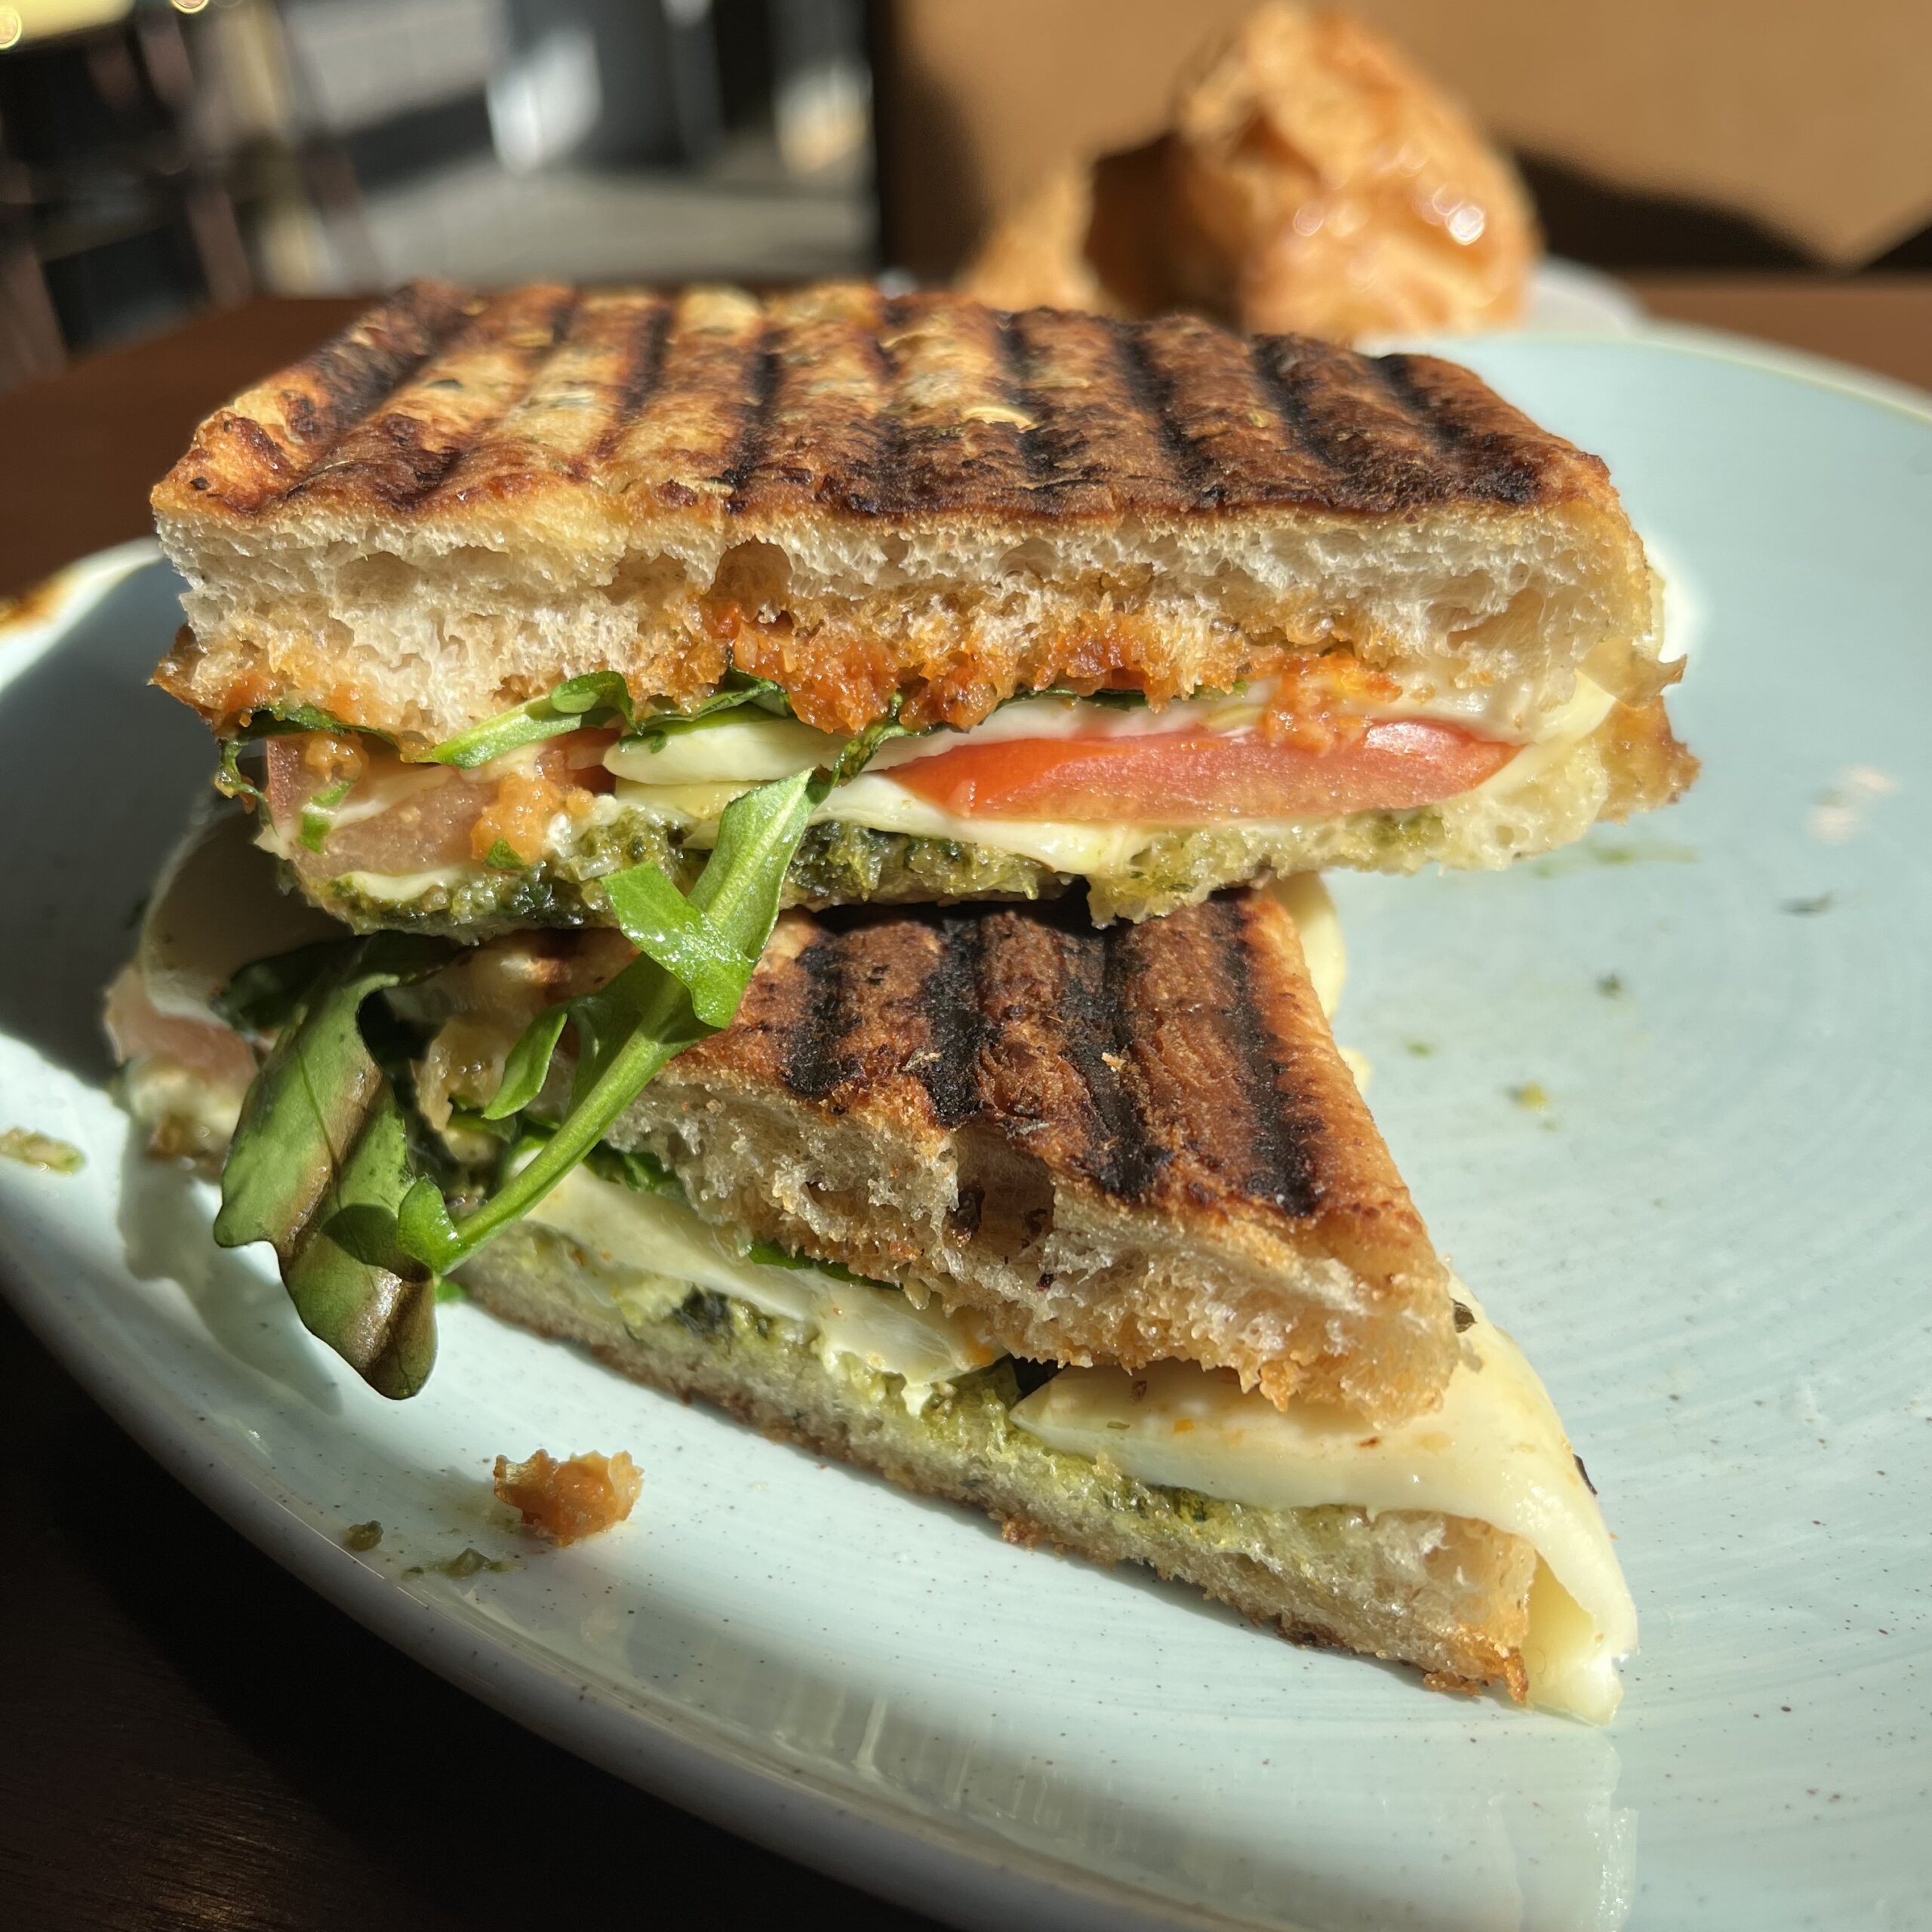 Image of a panini with tomato, cheese, and arugula, sliced in half.